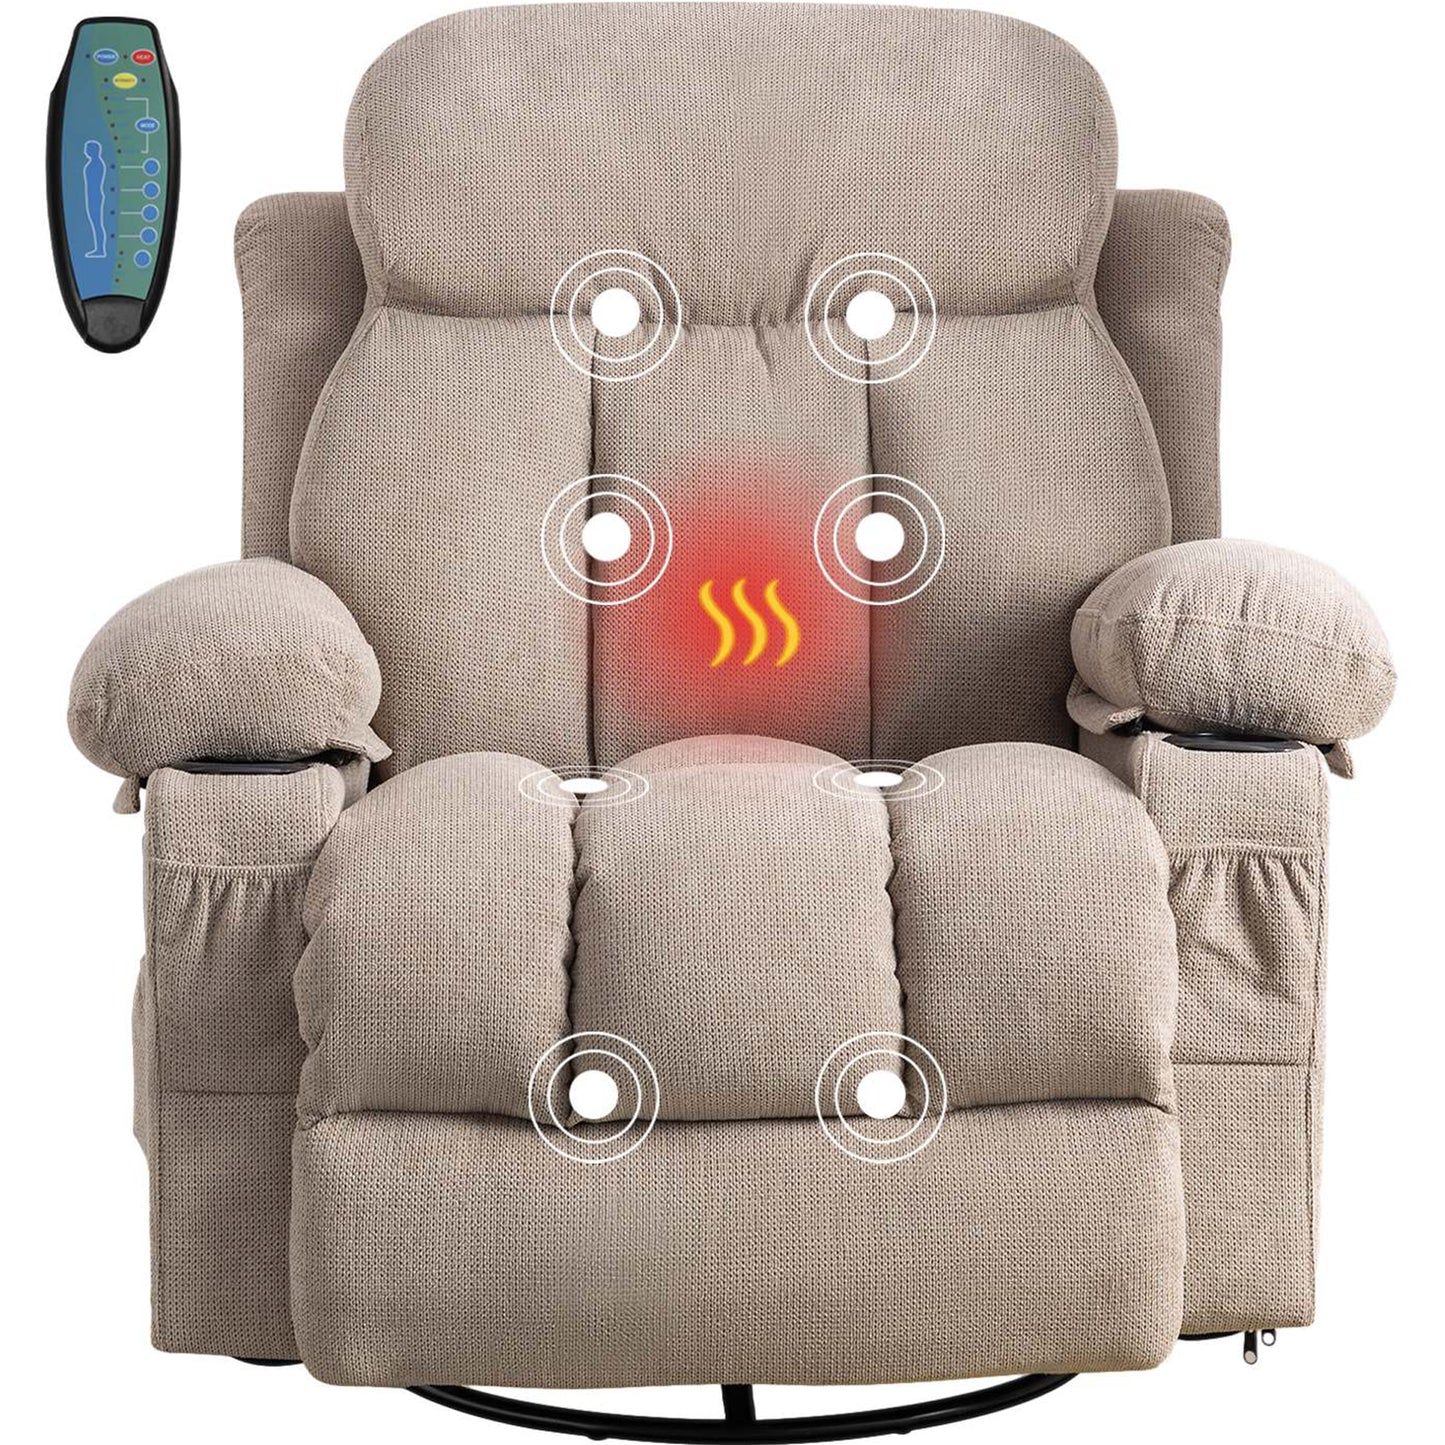 HSUNNS Recliner Chair with Heat and Massage Function, Swivel Rocker Sofa with USB and Cup Holders, Massage Chair for Adults, Heavy Duty Single Leisure Sofa Seat for Living Room Nursery, Beige